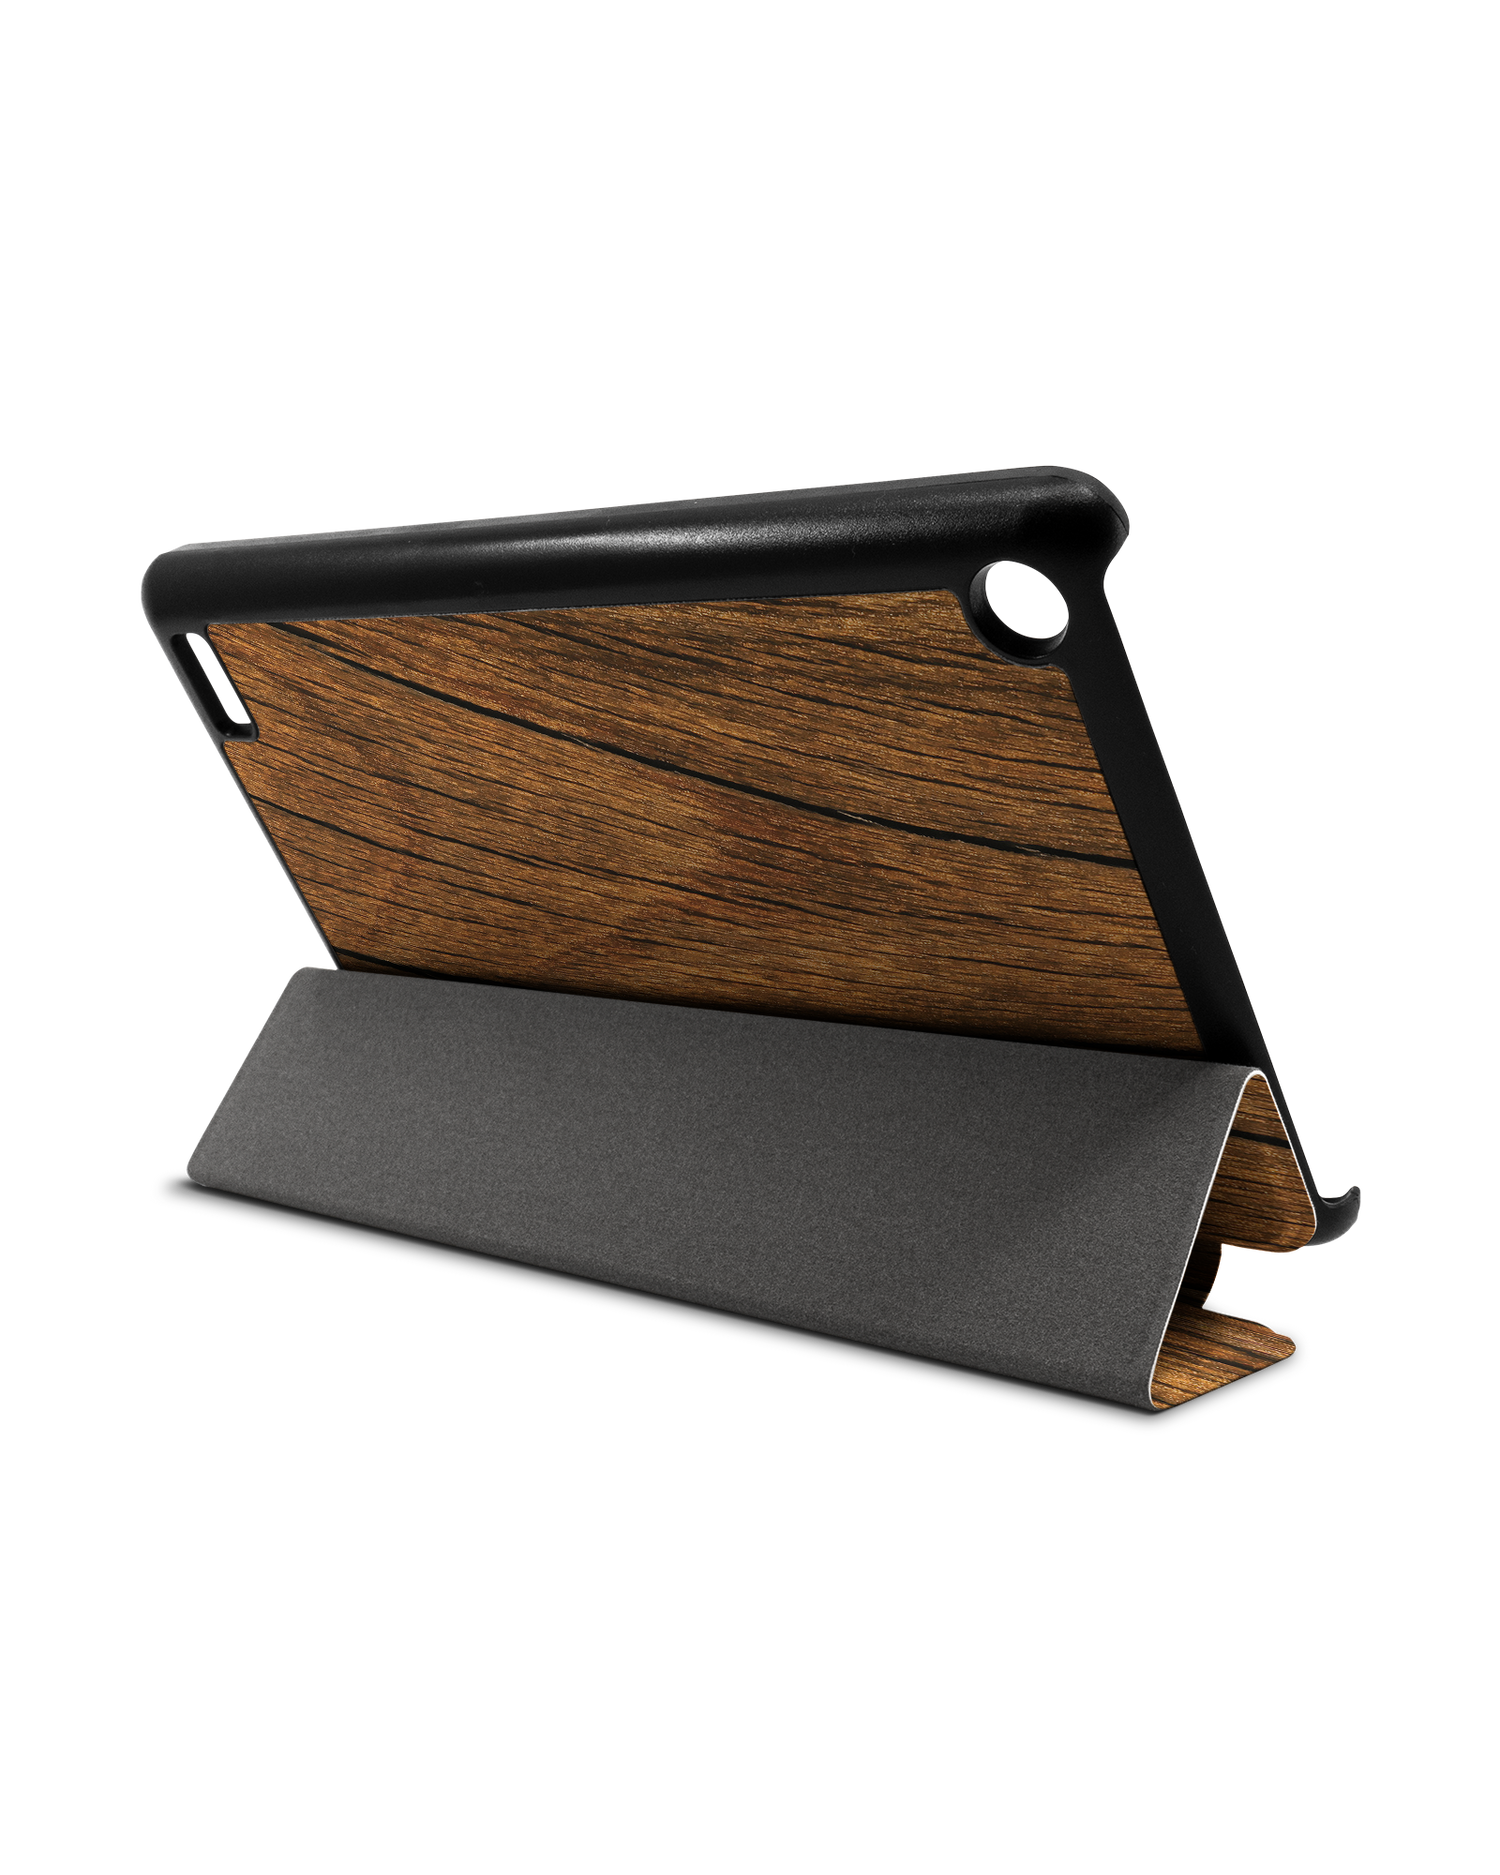 Wood Tablet Smart Case for Amazon Fire 7: Used as Stand